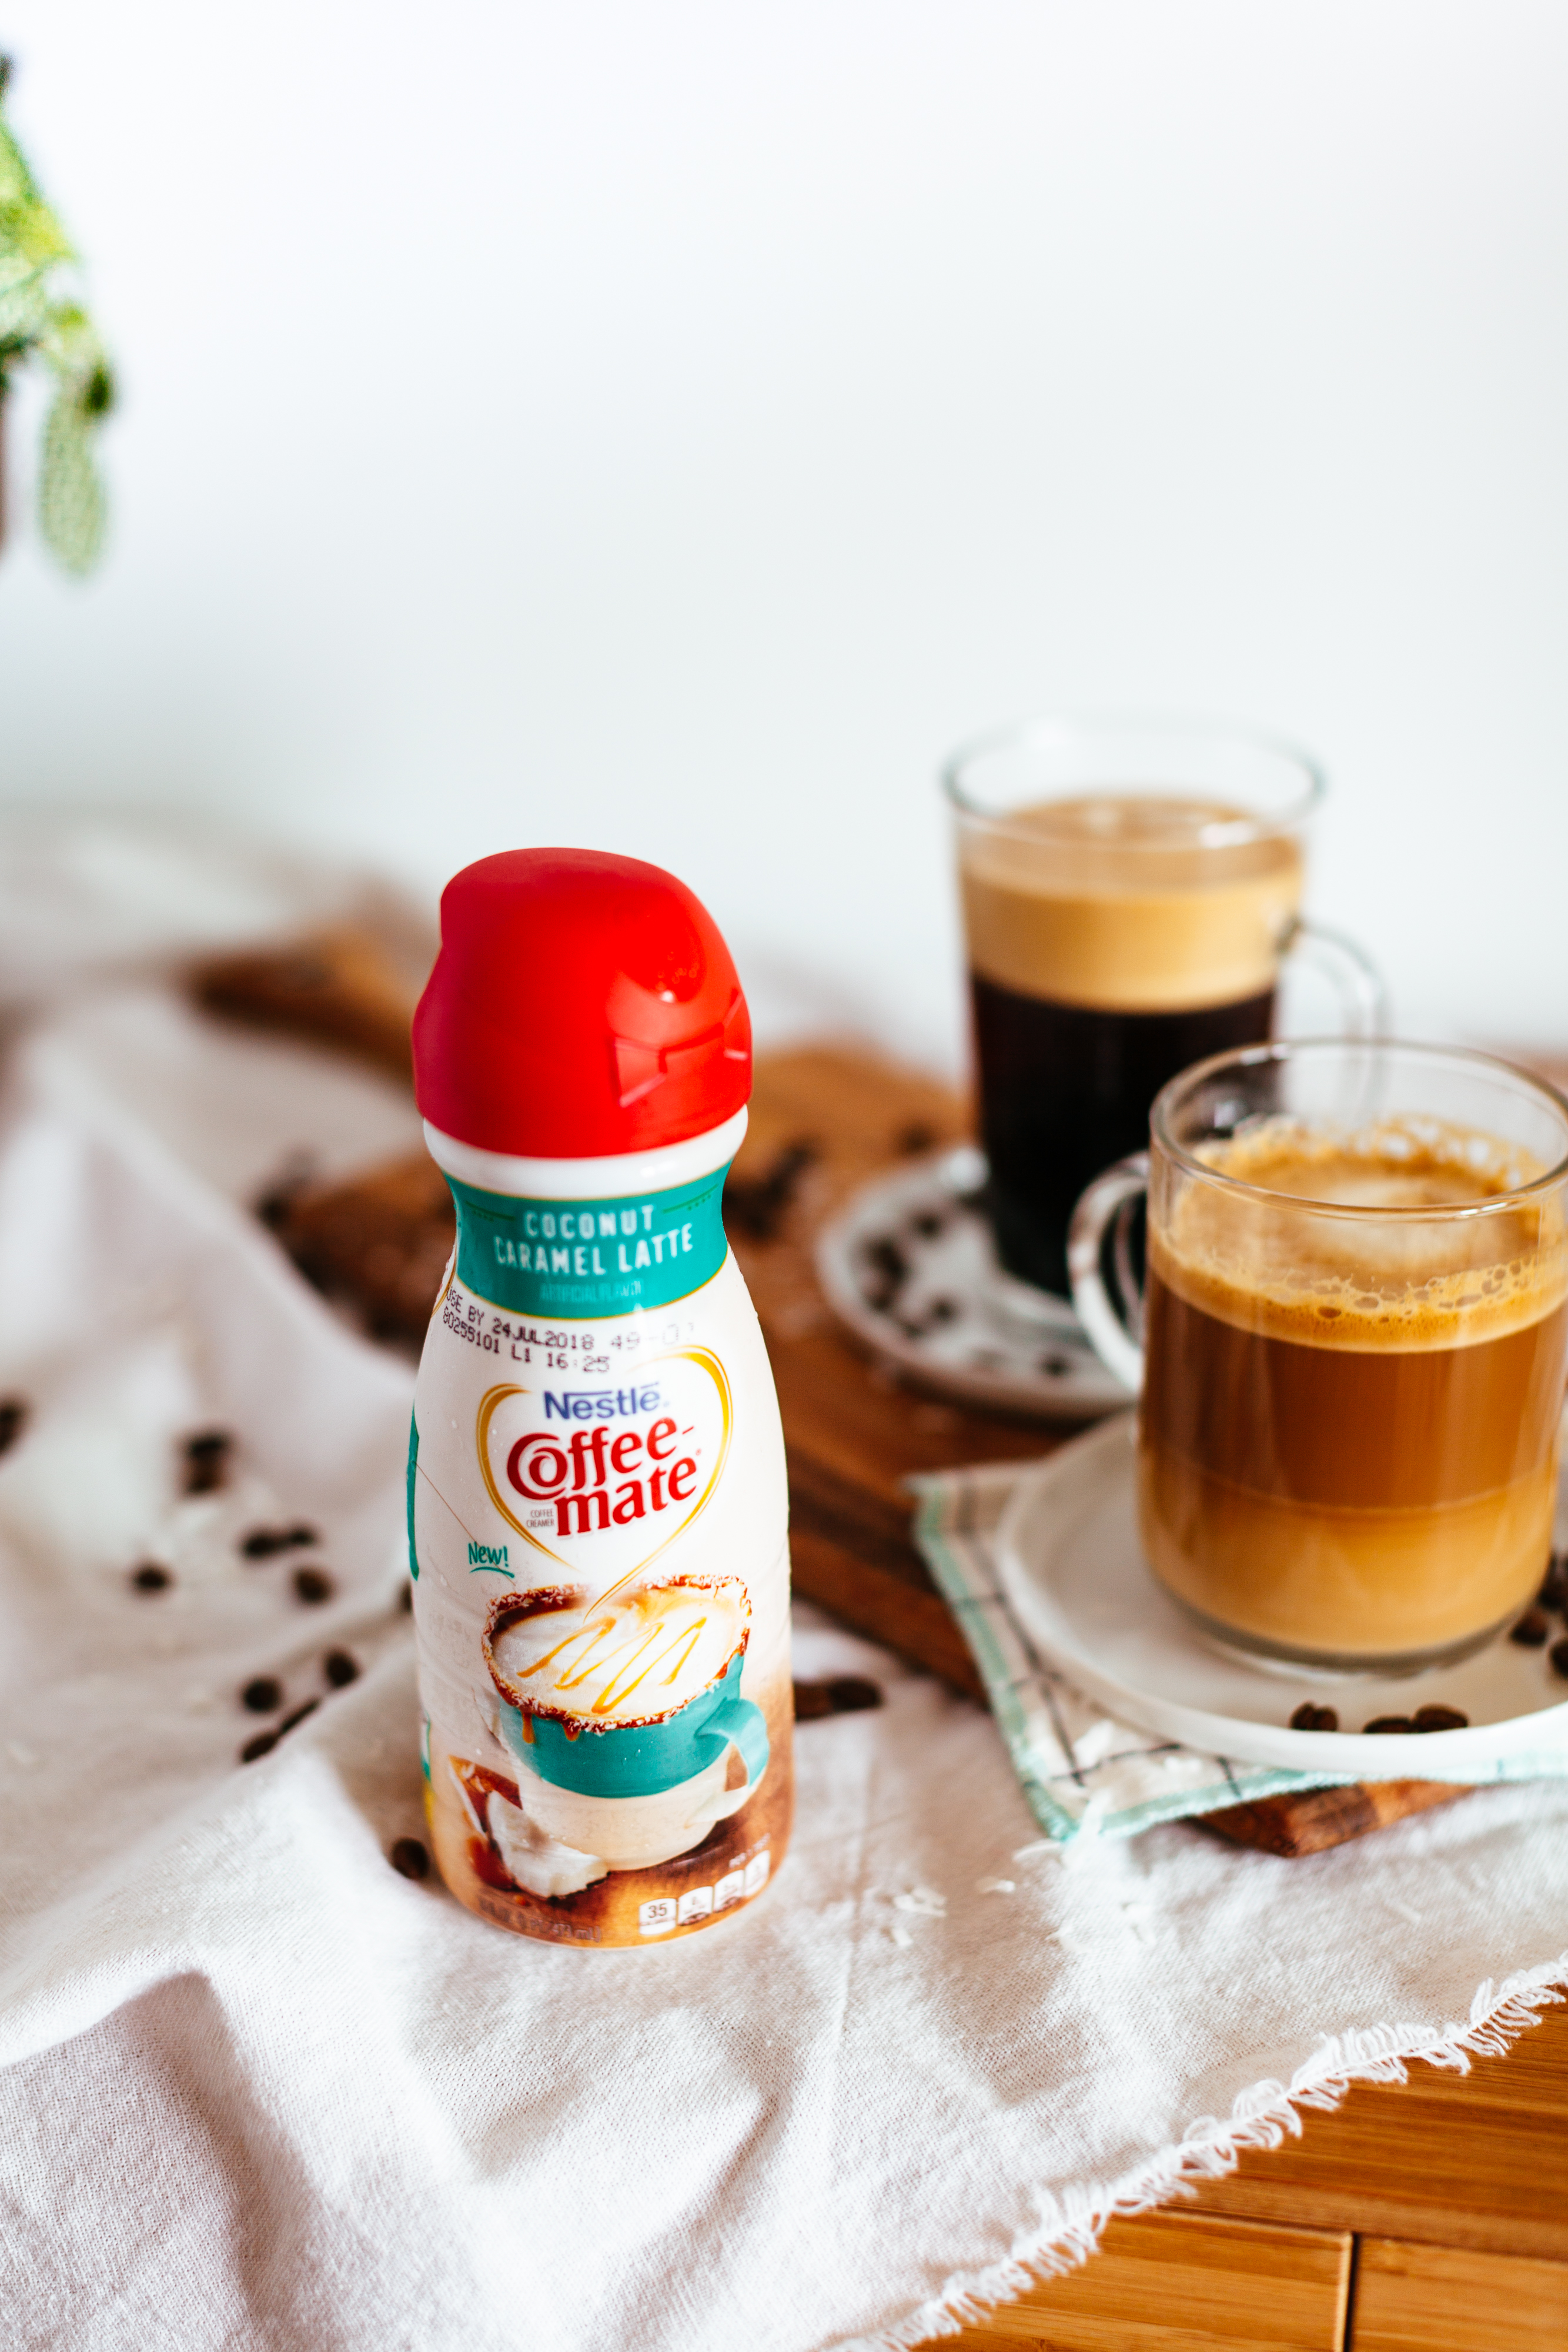 Have you tried the new Coffee-mate Creamers yet? They're divine! Here's how to enjoy them over a gal pal coffee date | bygabriella.co